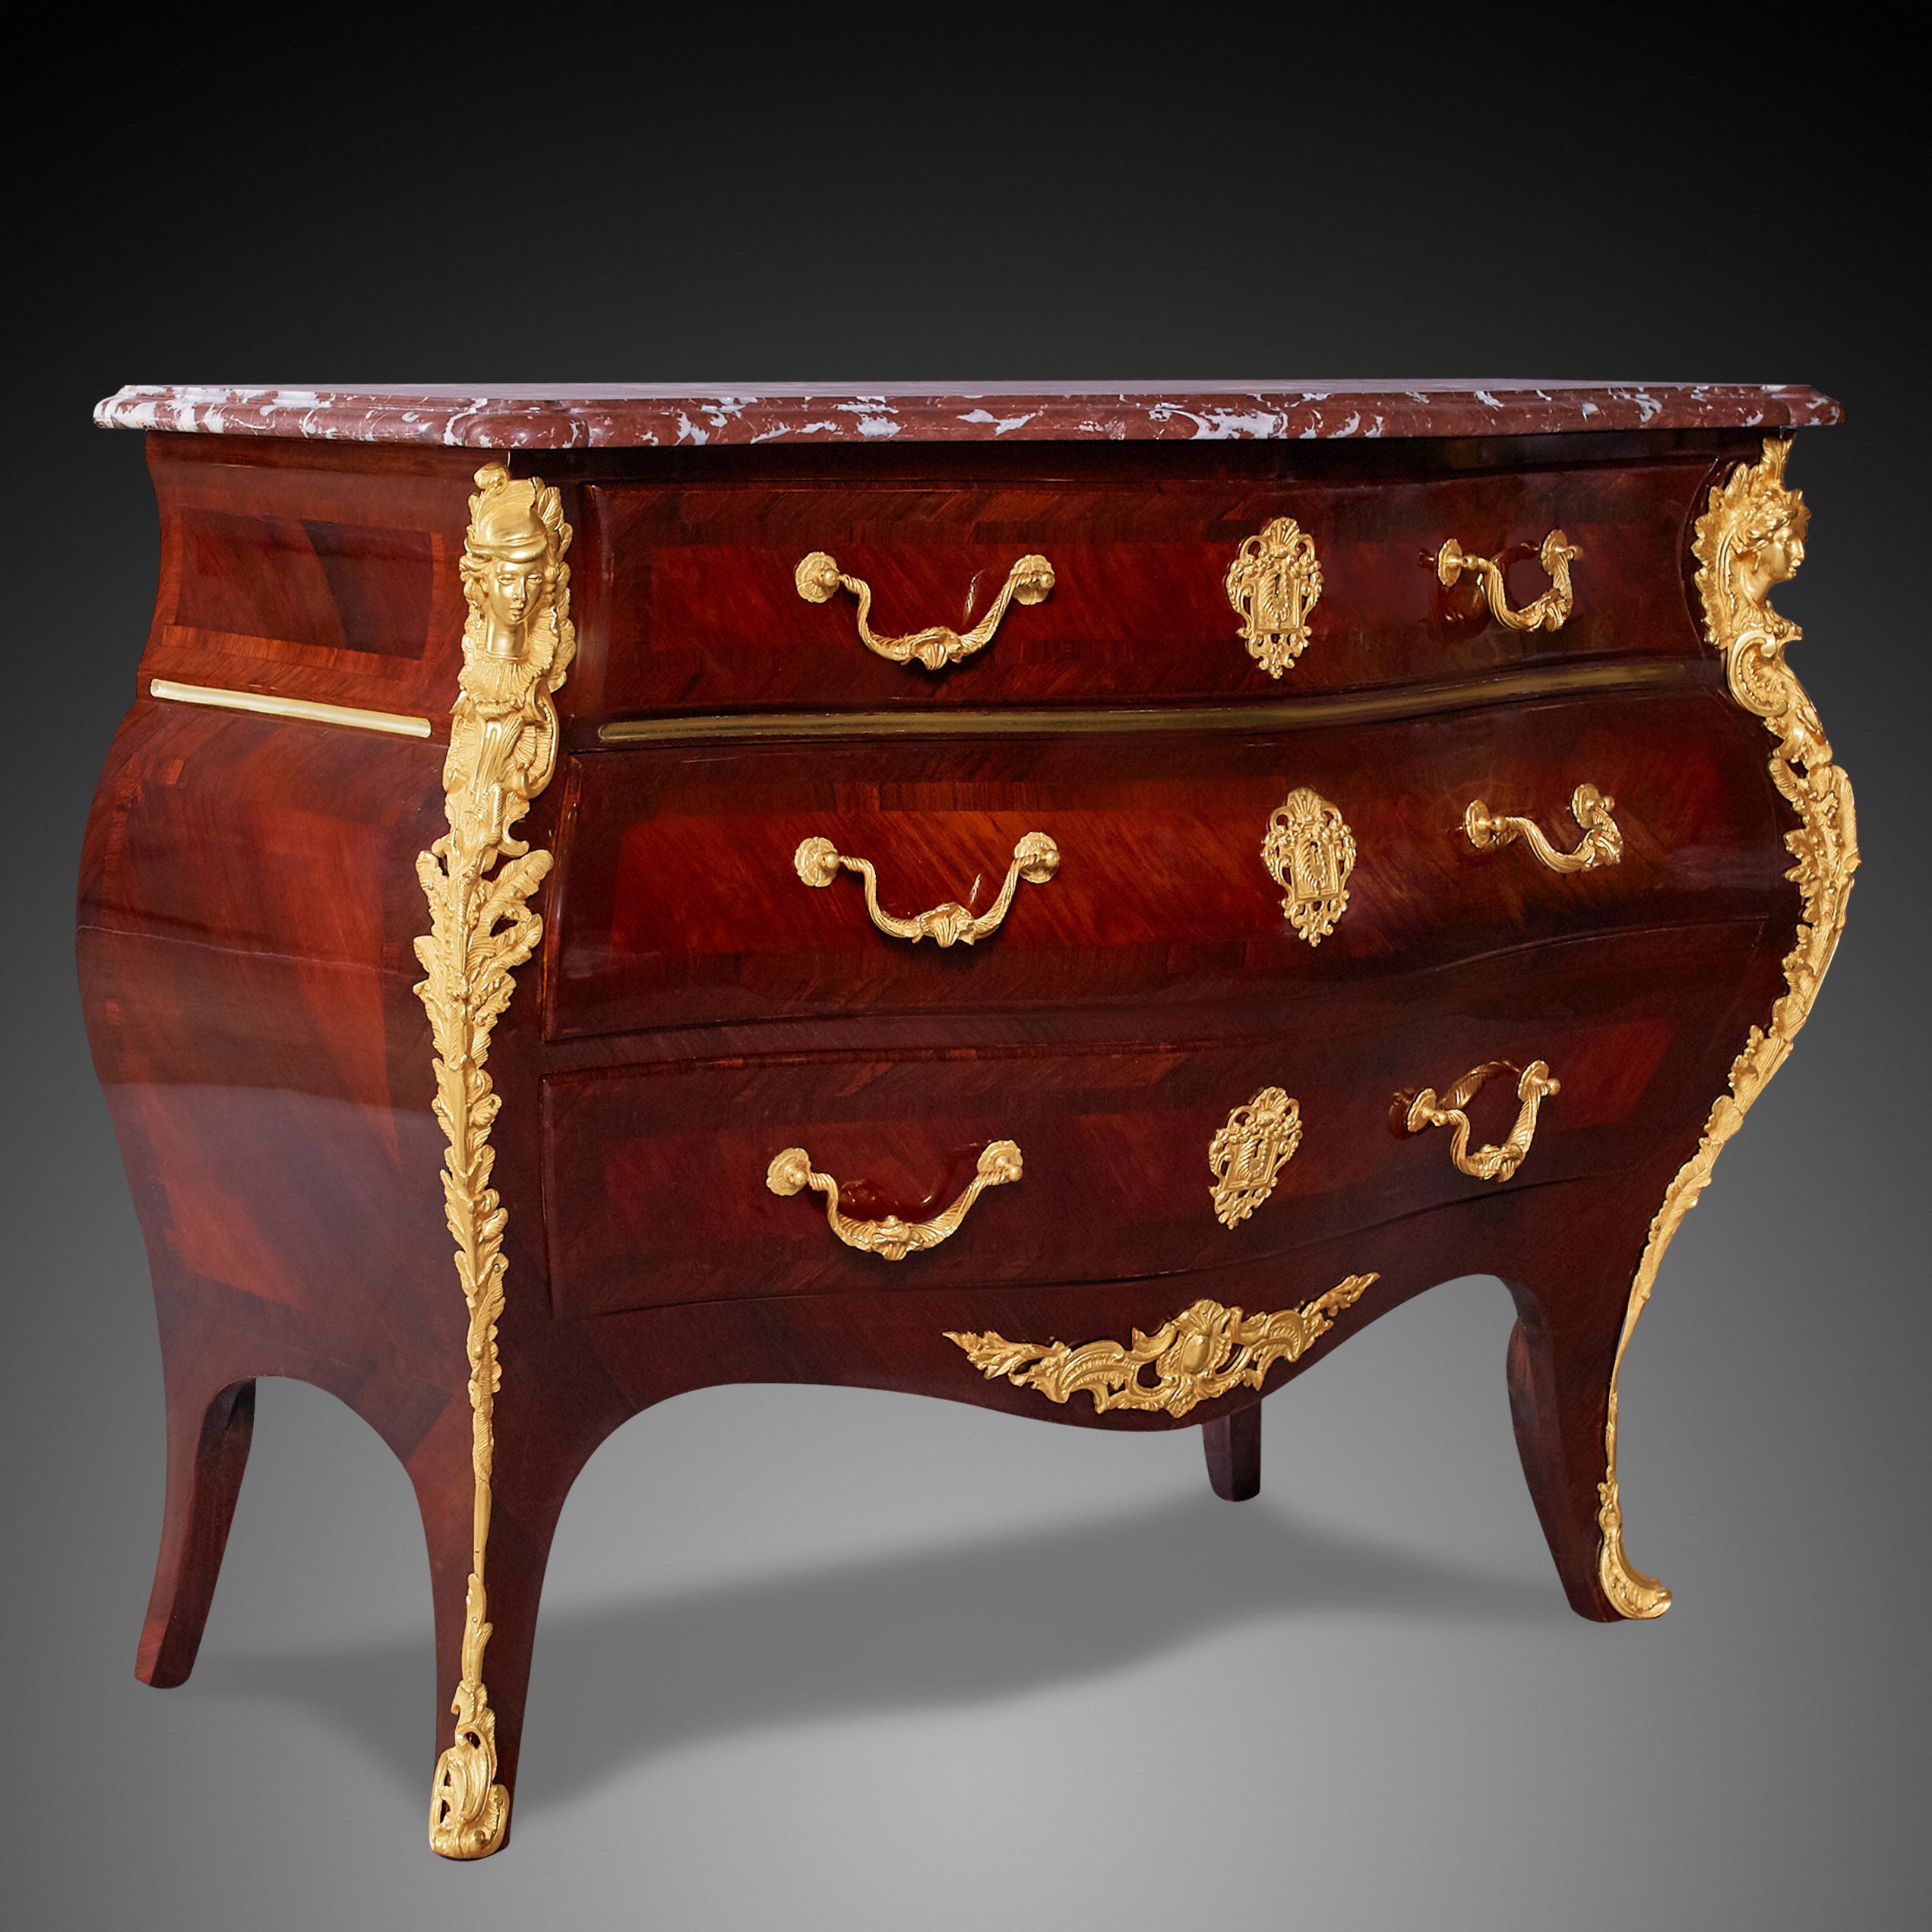 A Louis XV Style commode with a molded marble top above three long drawers, raised on cabriole legs, having a generous curve on the facade and on the sides. Each drawer has two ormolu handles and one keyhole, flanked by curved uprights surmounted by